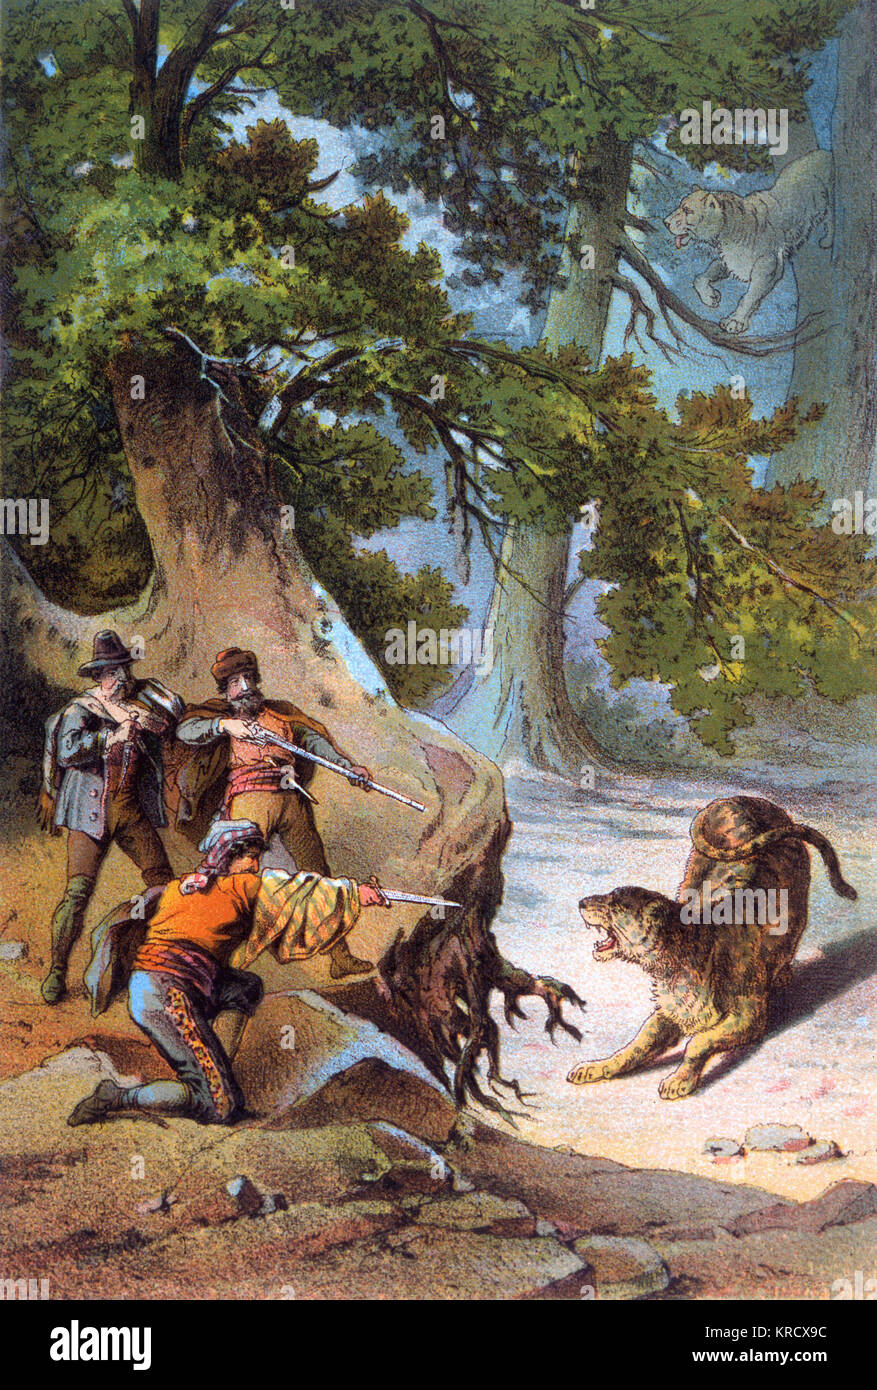 Three Mexicans encounter a  mountain lion, and hope that  their gun, backed by two  daggers, will save them from  its claws and jaw.      Date: 1880 Stock Photo